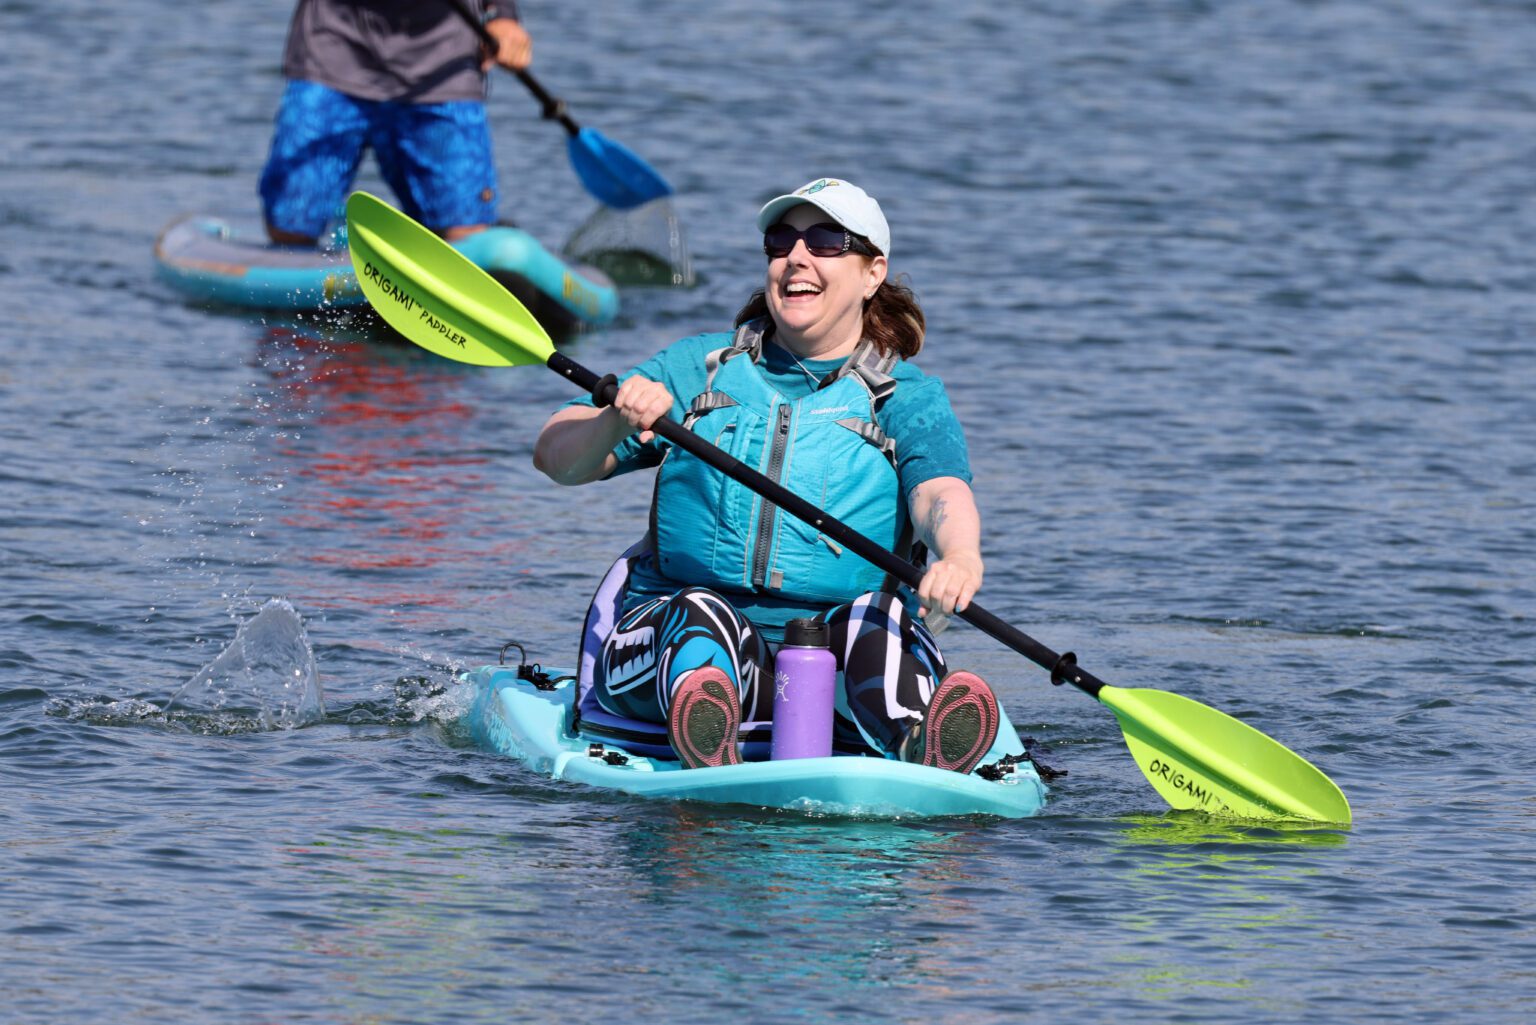 Kari Neumeyer of Bellingham beams as she nears the finish of an ovarian cancer fundraiser and awareness paddling event she organized Saturday on Bellingham Bay. The event drew about three dozen paddlers raising money and drawing attention to the deadly